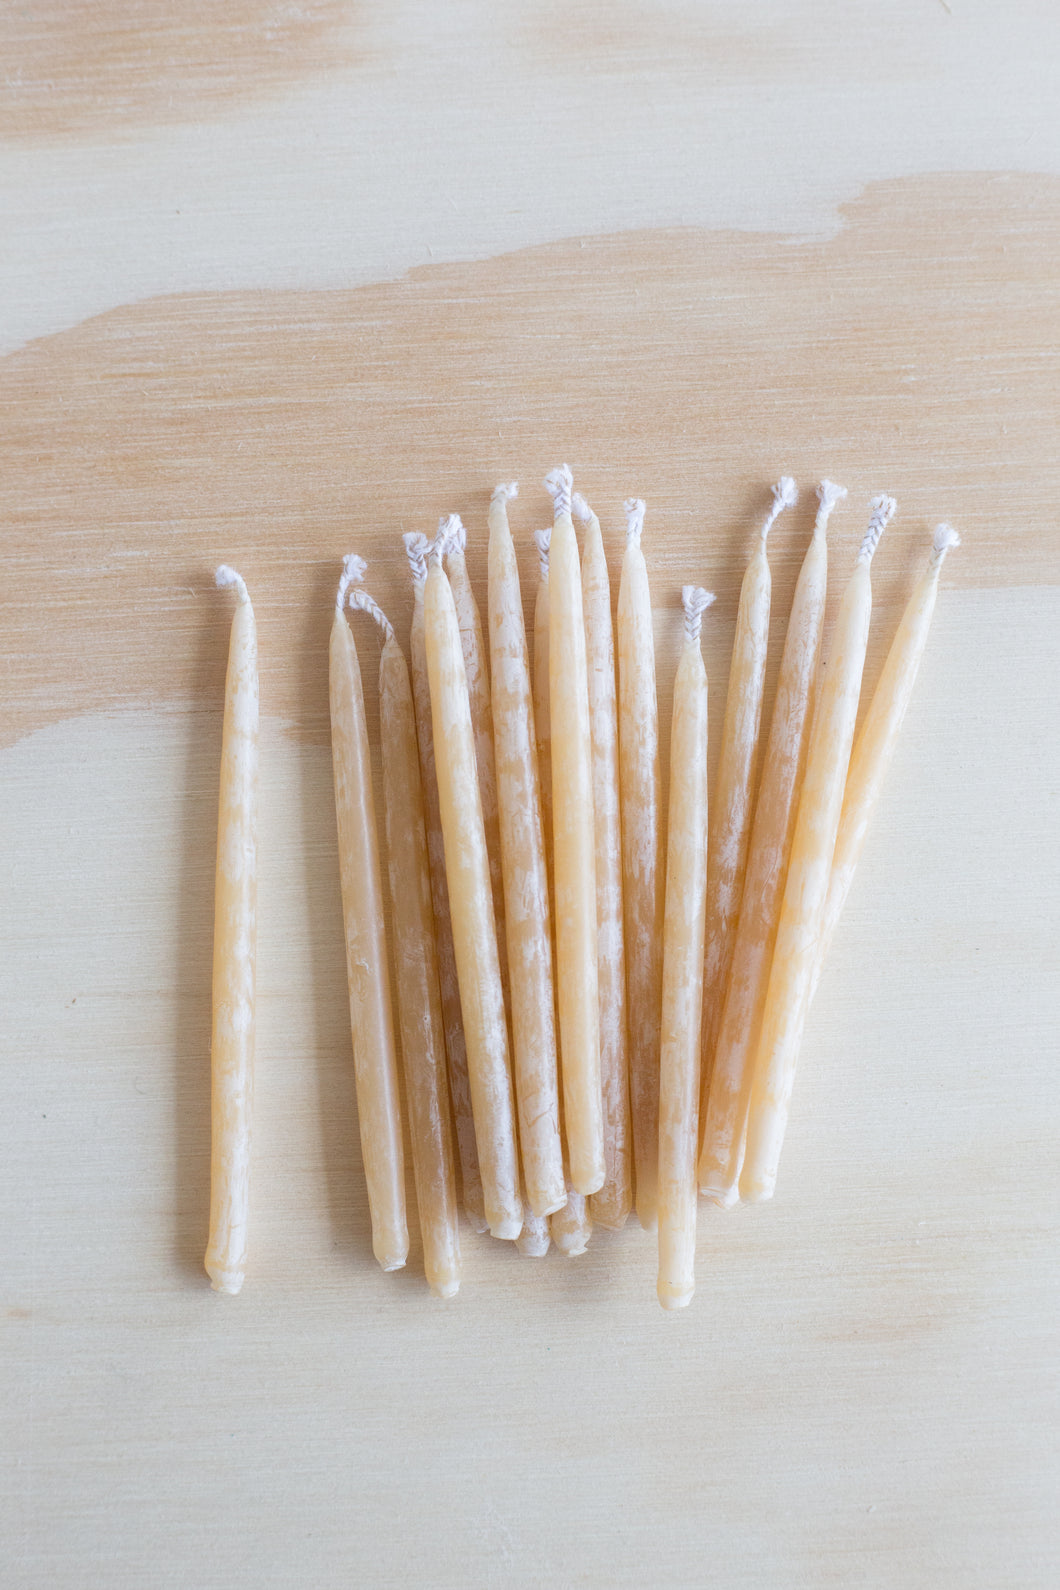 Beeswax Birthday Candles - 3 Colors Available